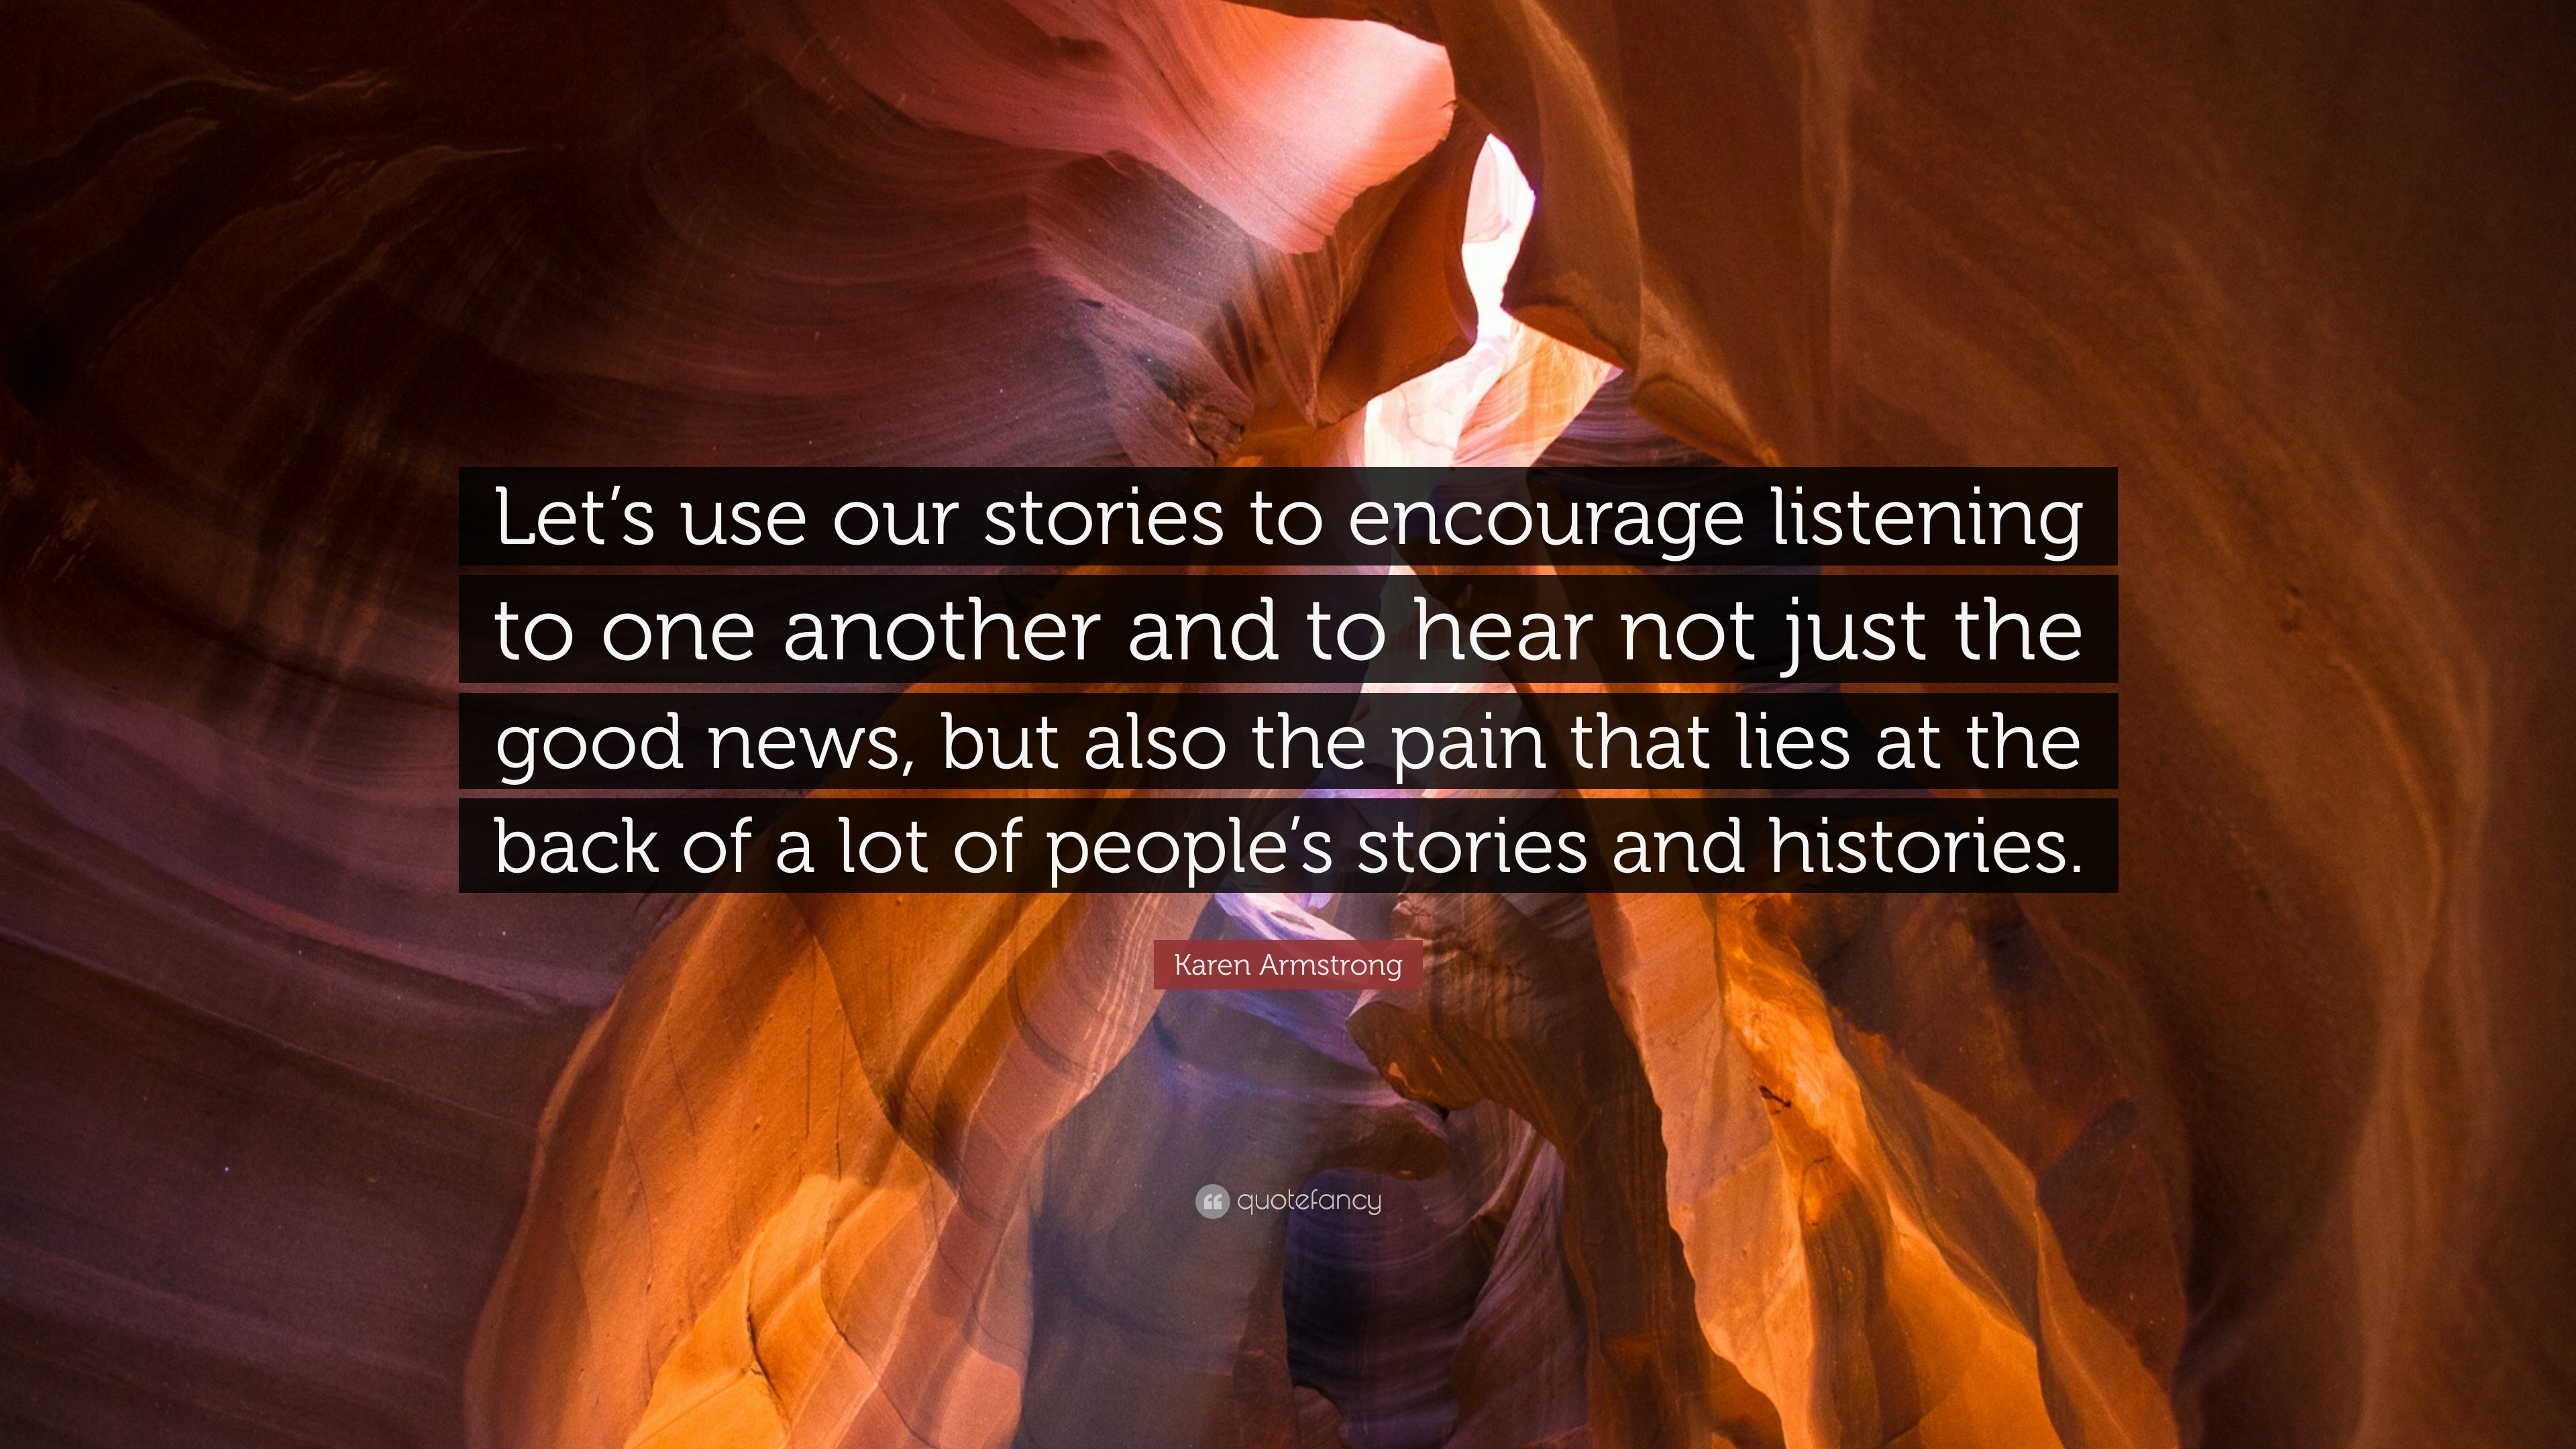 https://quotefancy.com/media/wallpaper/3840x2160/836052-Karen-Armstrong-Quote-Let-s-use-our-stories-to-encourage-listening.jpg